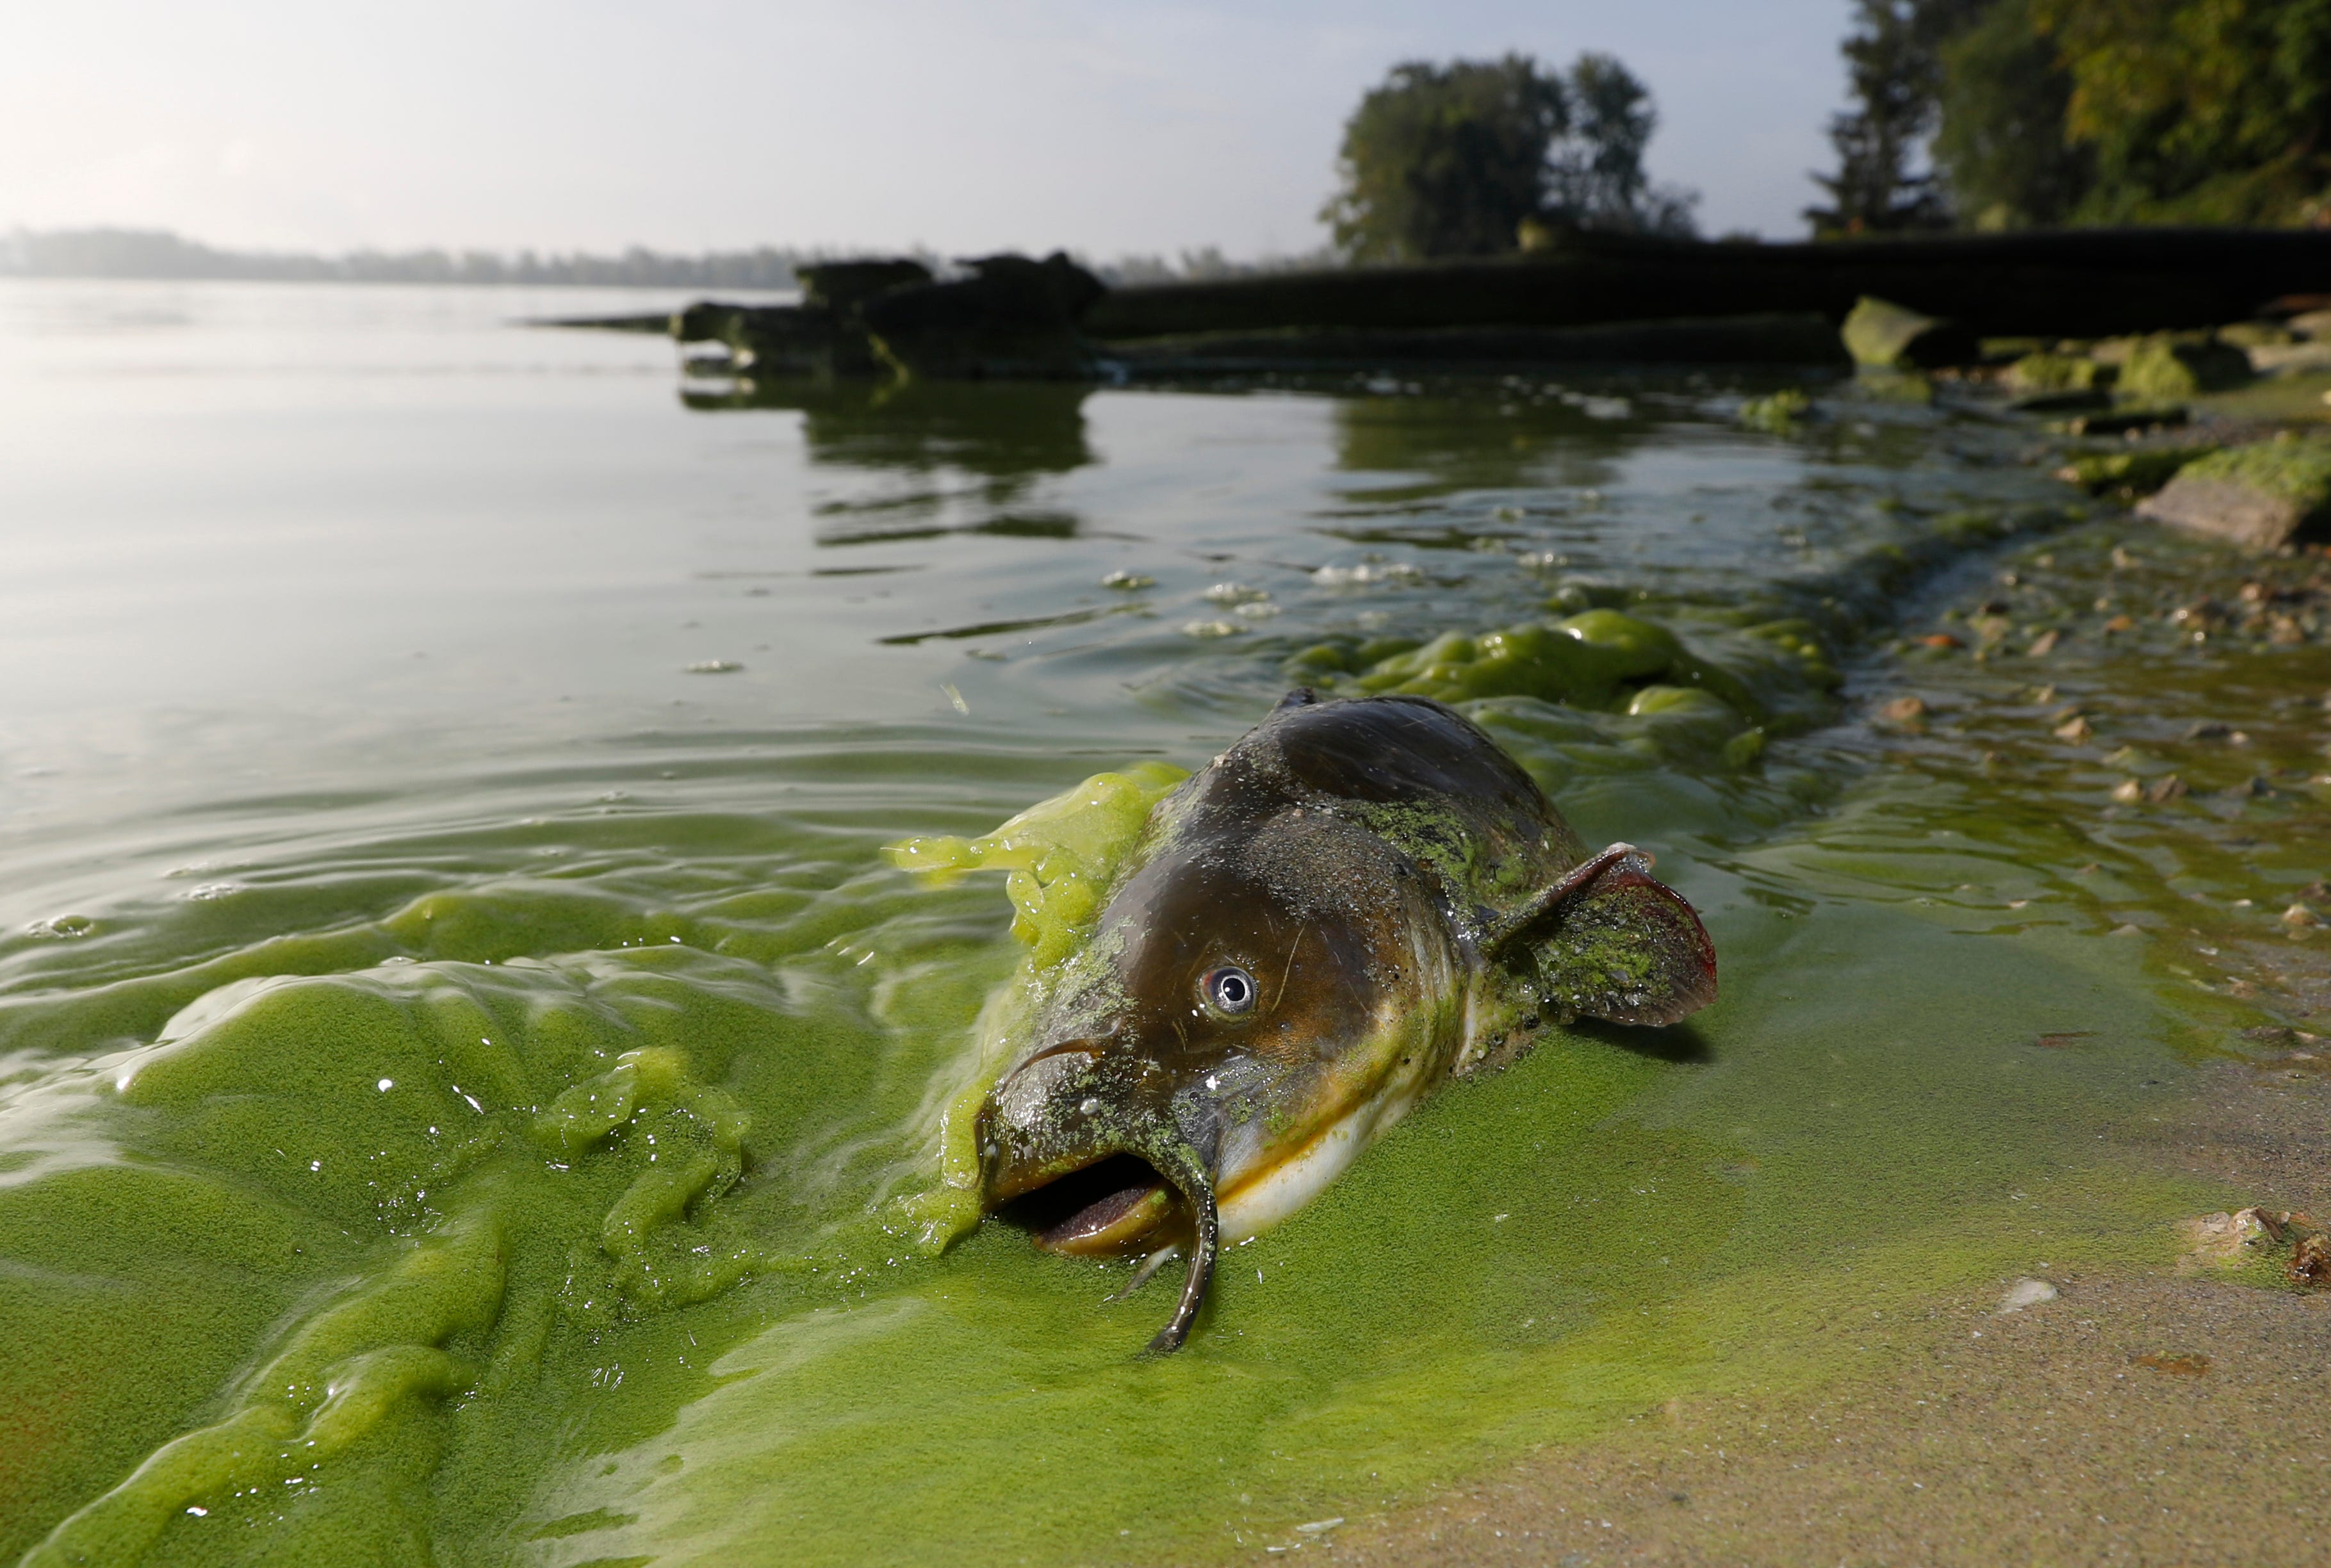 In this Sept. 20, 2017 photo, a catfish appears on the shoreline in the algae-filled waters at the end of 113th Street in the Point Place section of North Toledo, Ohio. In recent years, the blooms have continued affecting fish habitats and those along the Lake Erie coastline.